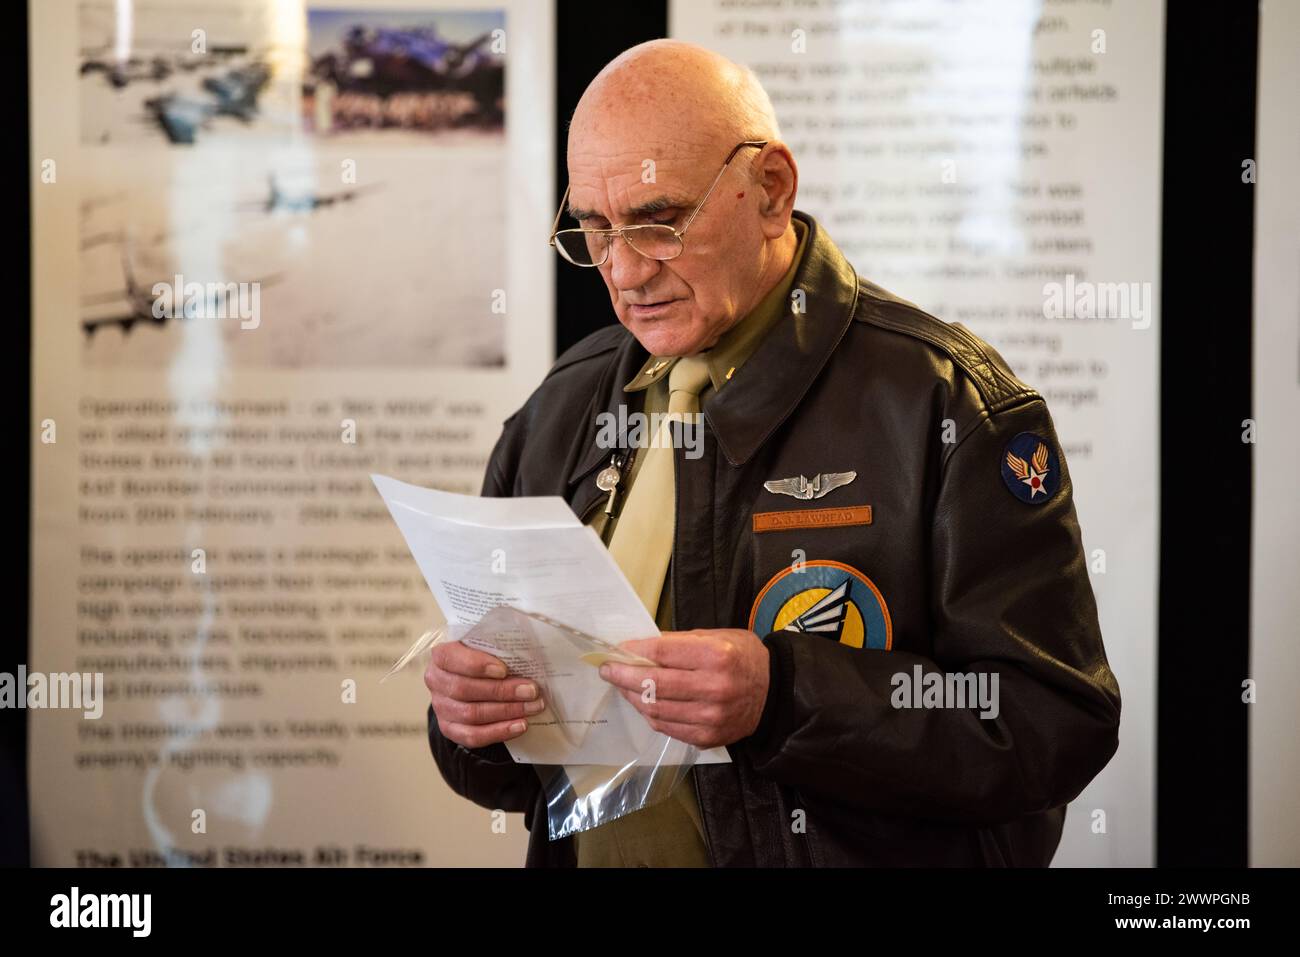 Brian Francis reads a poem during a Ceremony of Remembrance at Stanwick Lakes, England, Feb. 22, 2024. U.S. and U.K. leaders gathered to honor 17 Airmen who died in a midair collision on Feb. 22, 1944, involving B-17 Flying Fortresses from the 303rd Bombardment Group at RAF Molesworth and the 384th Bombardment Group at RAF Grafton Underwood. The Airmen were part of Operation Argument, or 'The Big Week,' targeting enemy industrial sites and aircraft facilities in Central Europe to secure Allied air superiority for the upcoming landings in France in June 1944.  Air Force Stock Photo